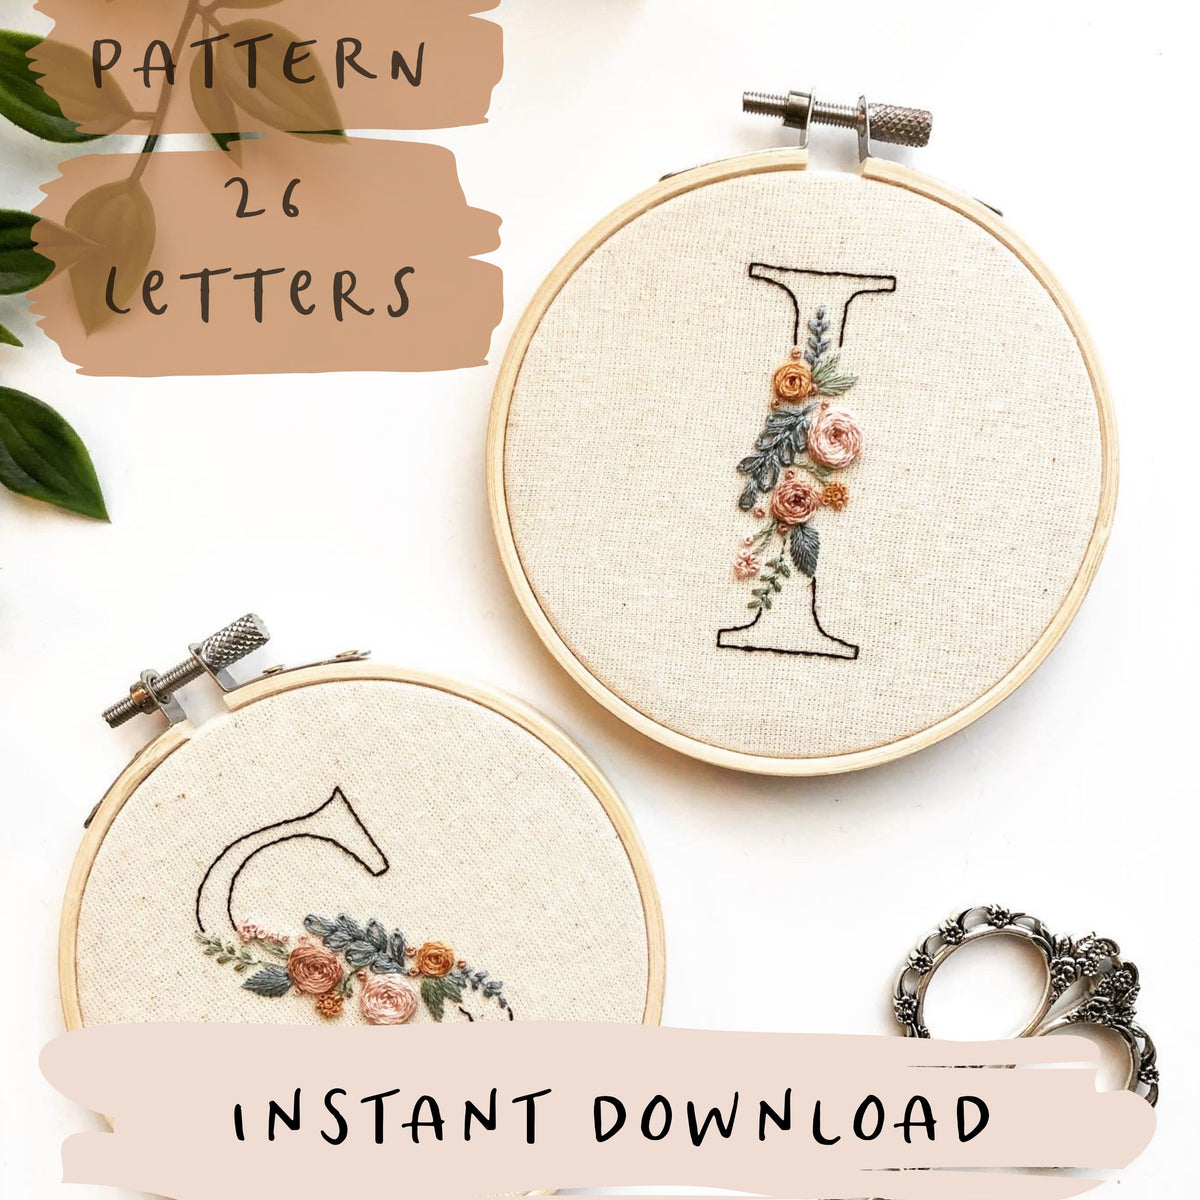 26+ Free Hand Embroidery Patterns (Adorable And Easy) ⋆ Hello Sewing